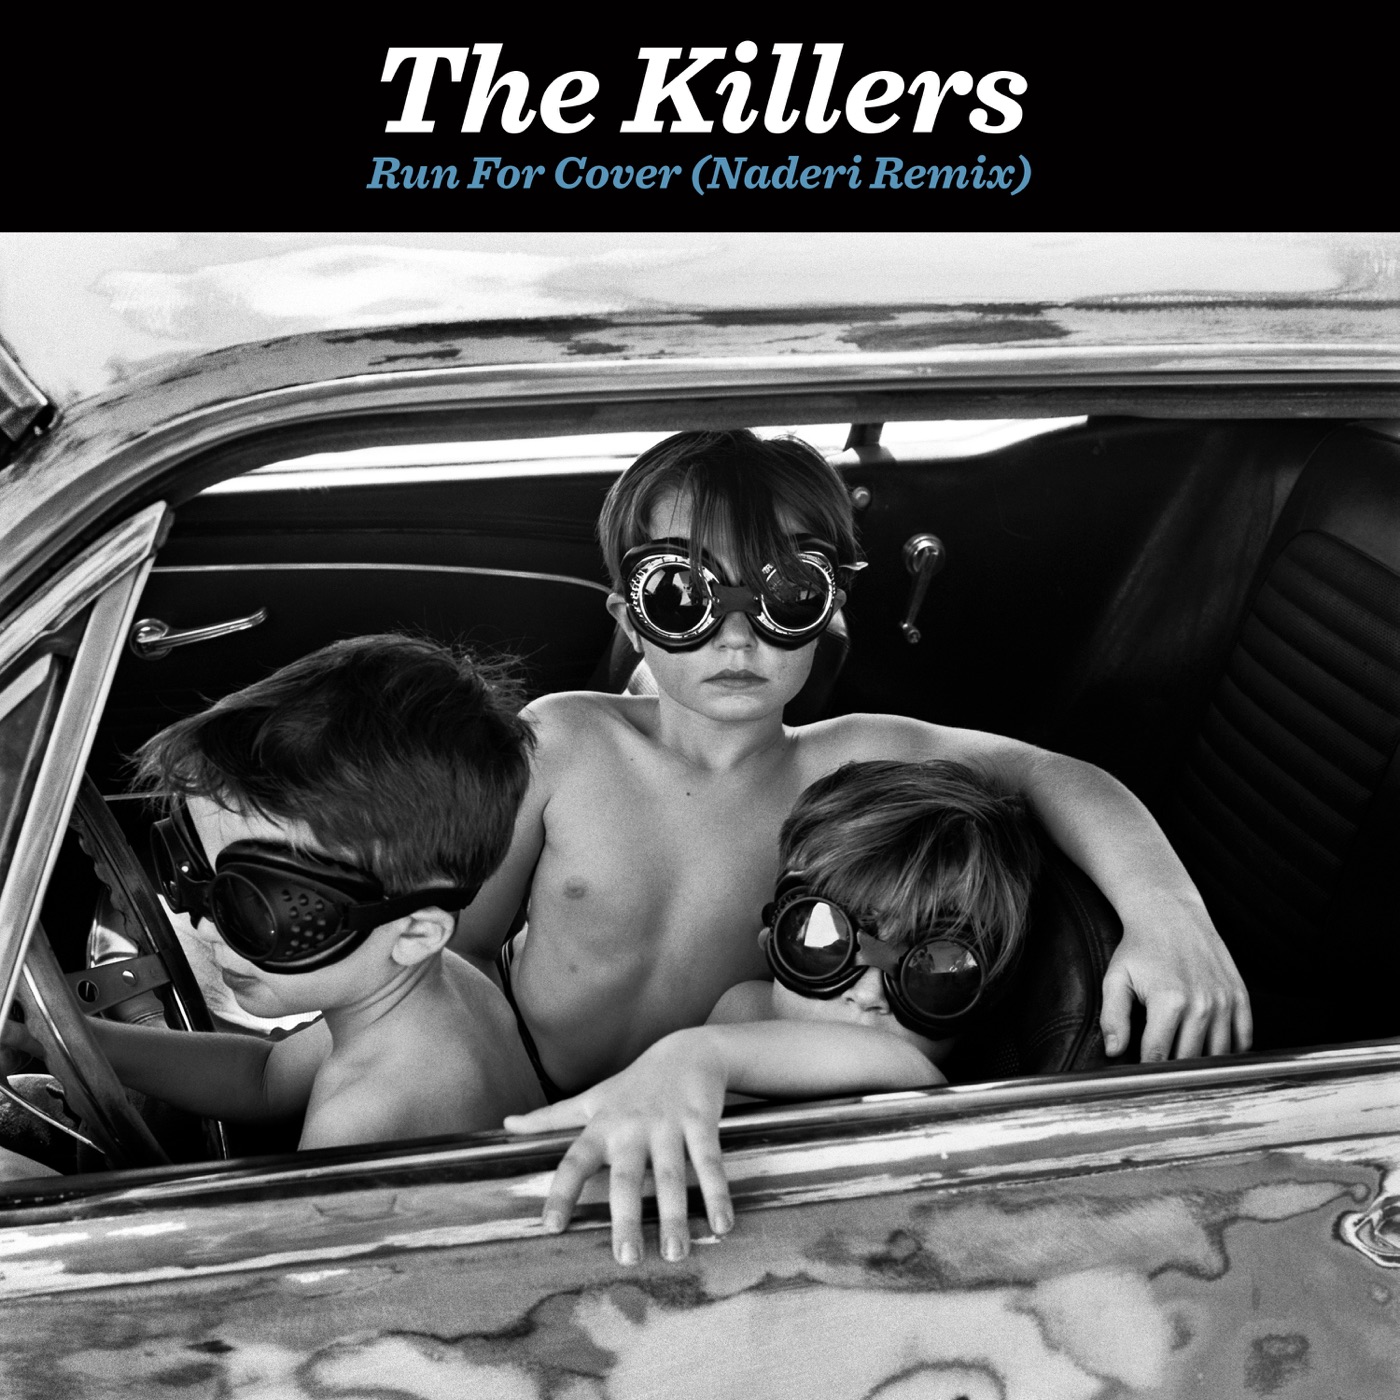 Run for Cover (Naderi Remix) by The Killers